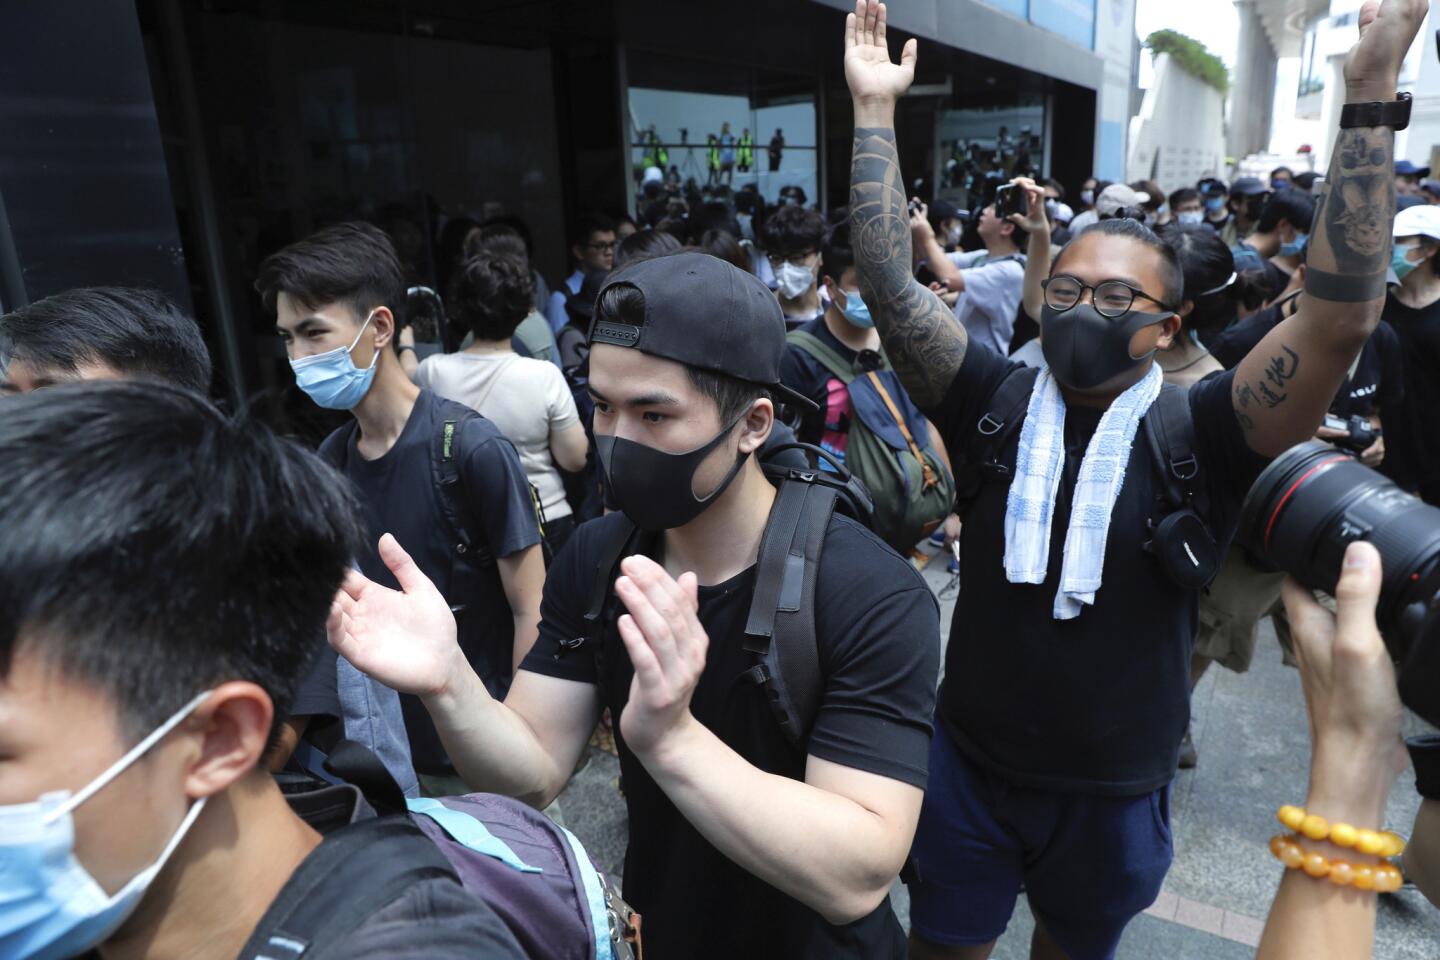 Protesters march outside the Hong Kong Revenue Tower.